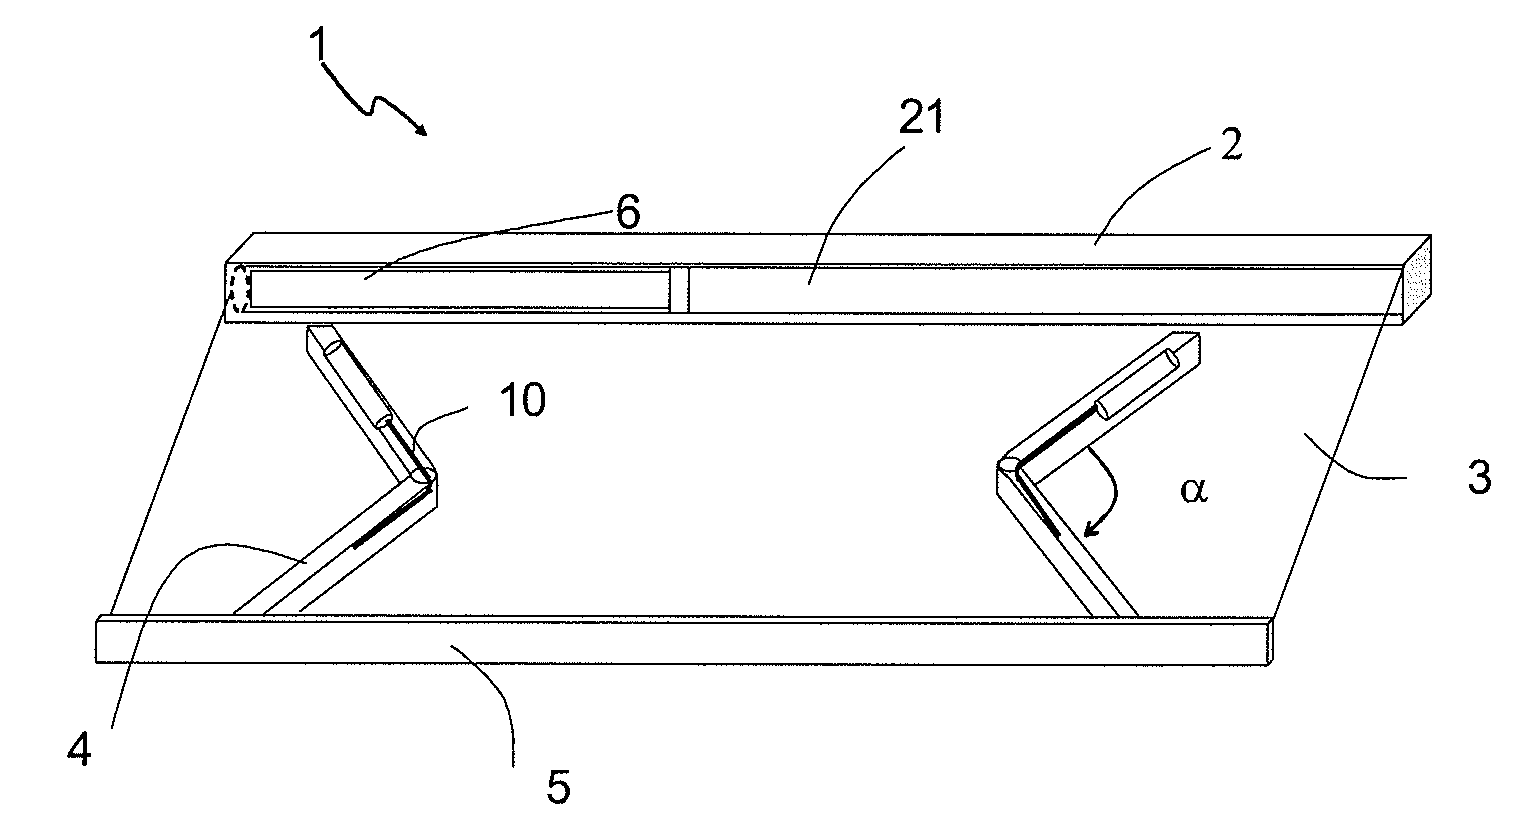 Method of operation for an electromechanical actuator for an awning with arms